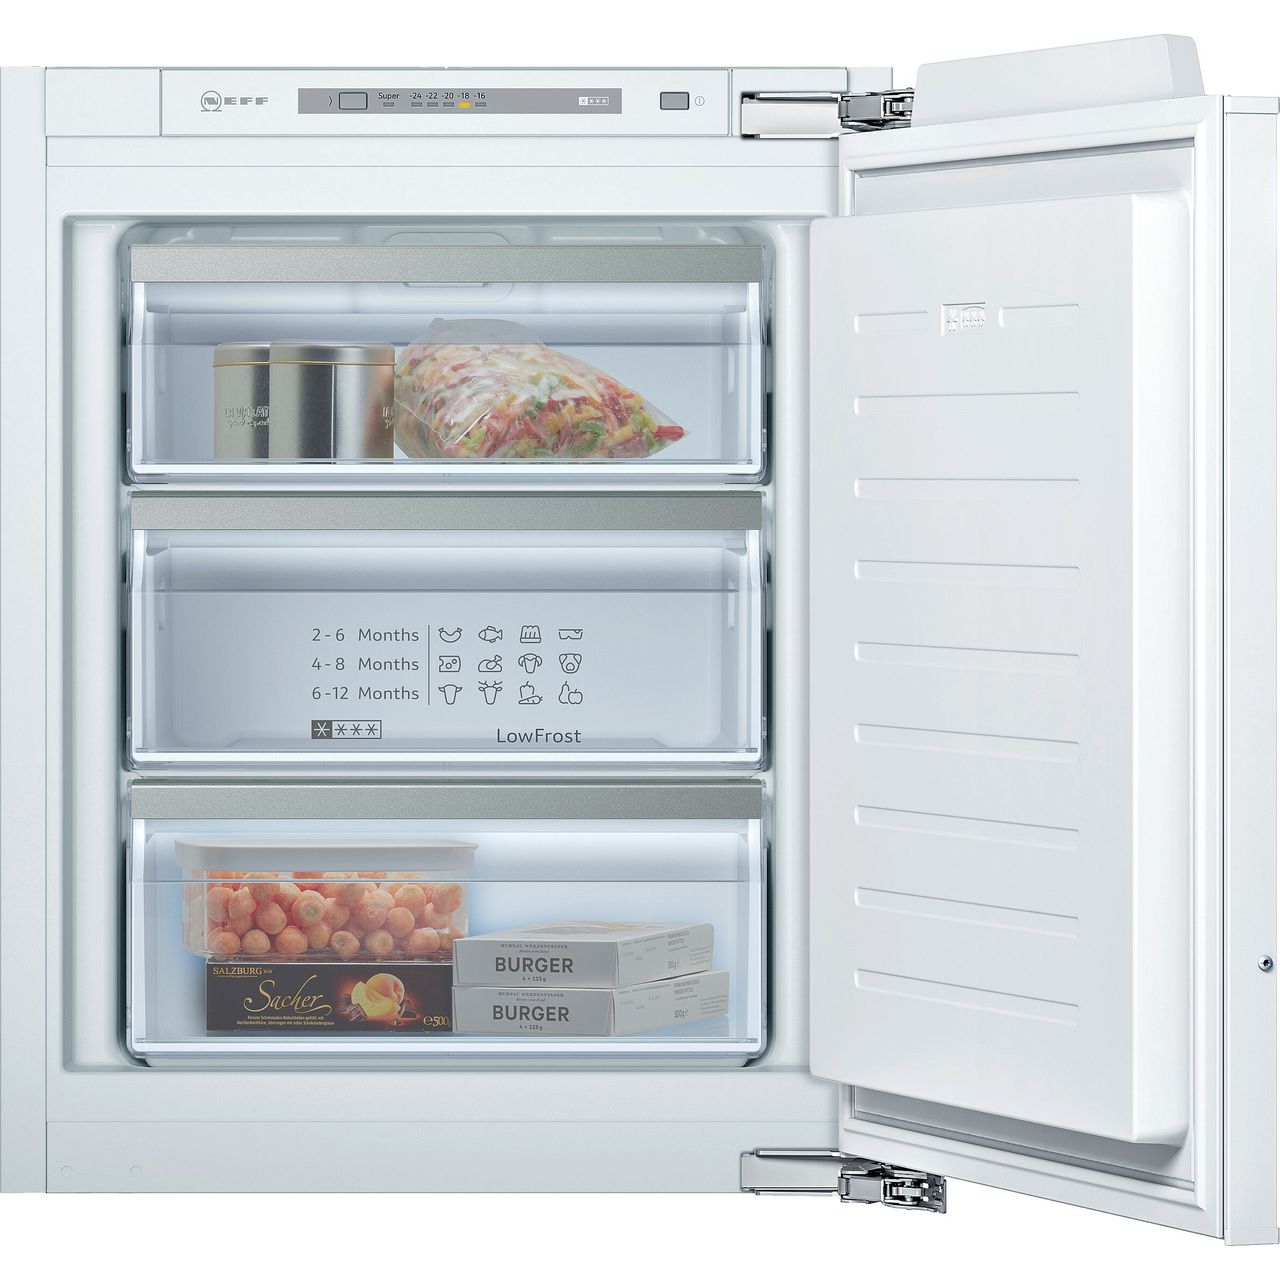 NEFF GI1113FE0 Integrated Upright Freezer with Fixed Door Fixing Kit Review